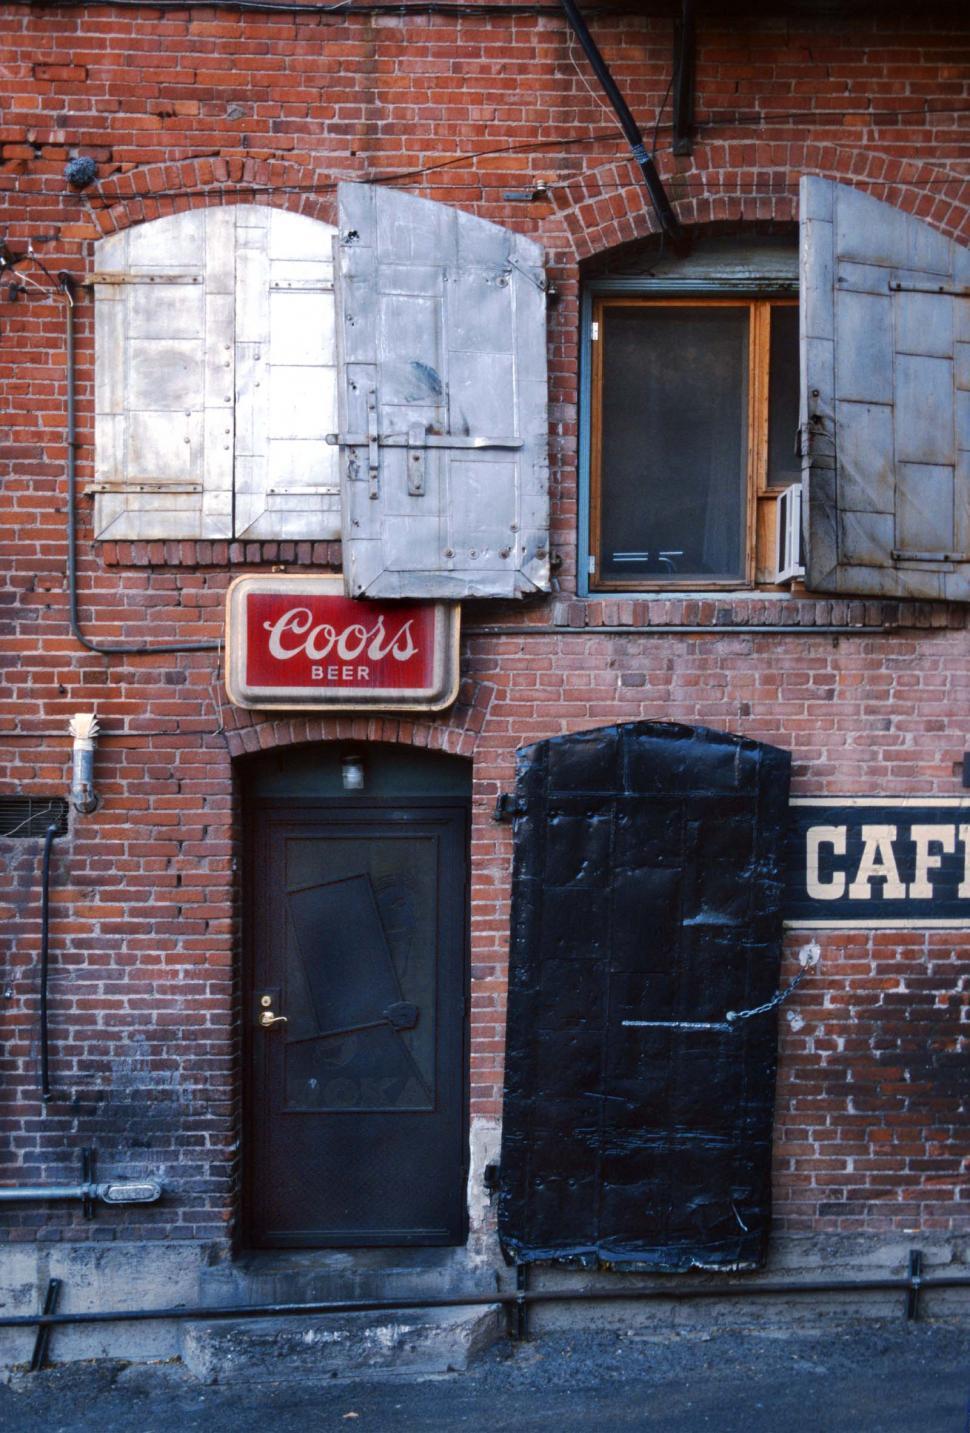 Download Free Stock Photo of Back alley behind bar - back entrance 